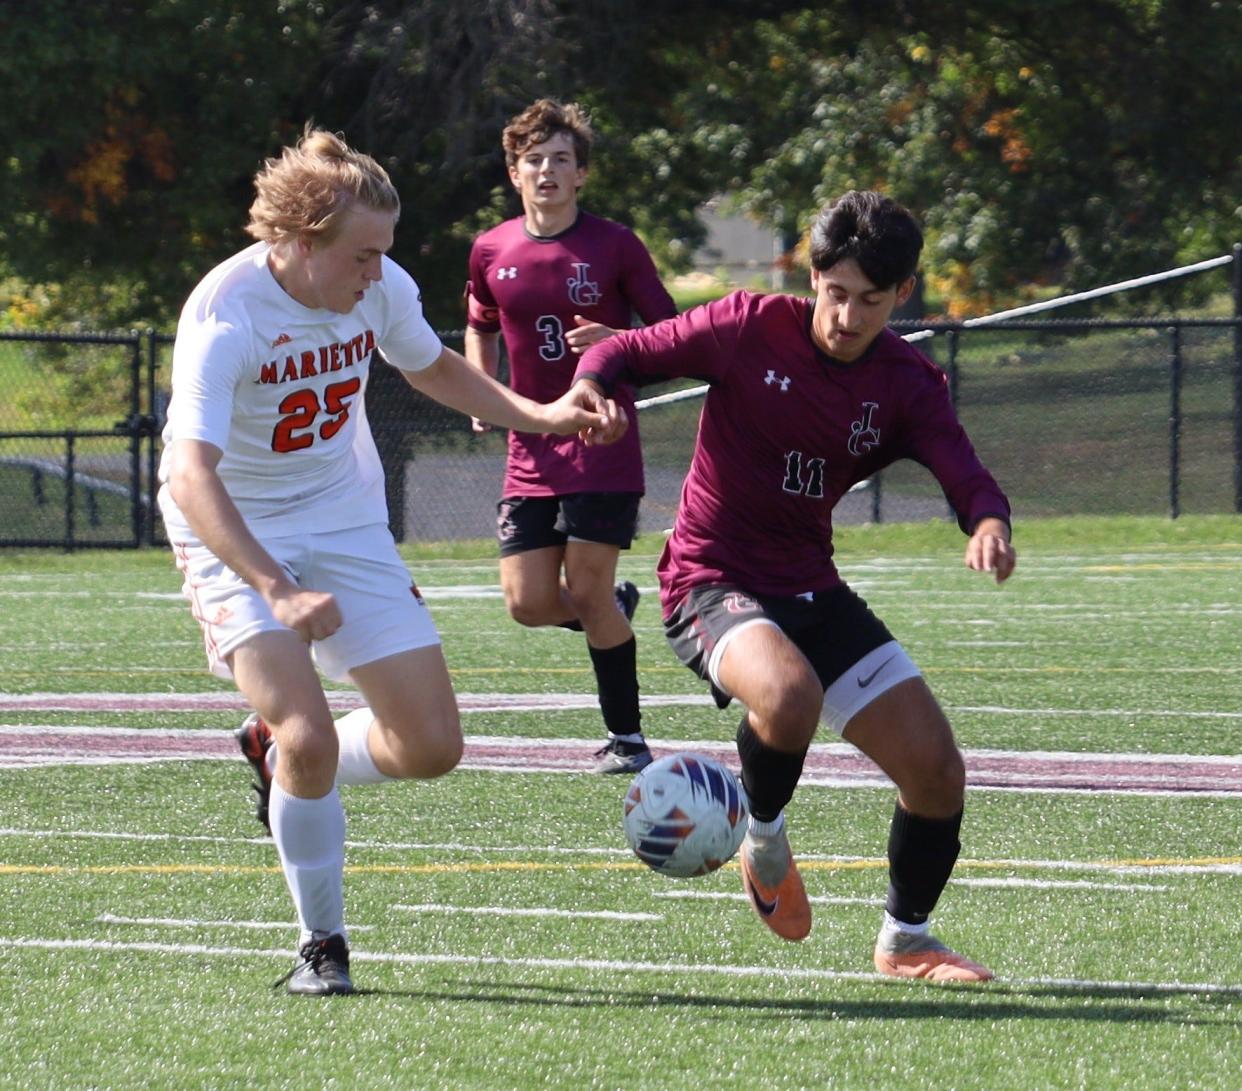 John Glenn's William Nicolozakes (11) dribbles the ball during against Marietta during a regular season match. Nicolozakes highlighted the boys soccer players on the East District First Team.